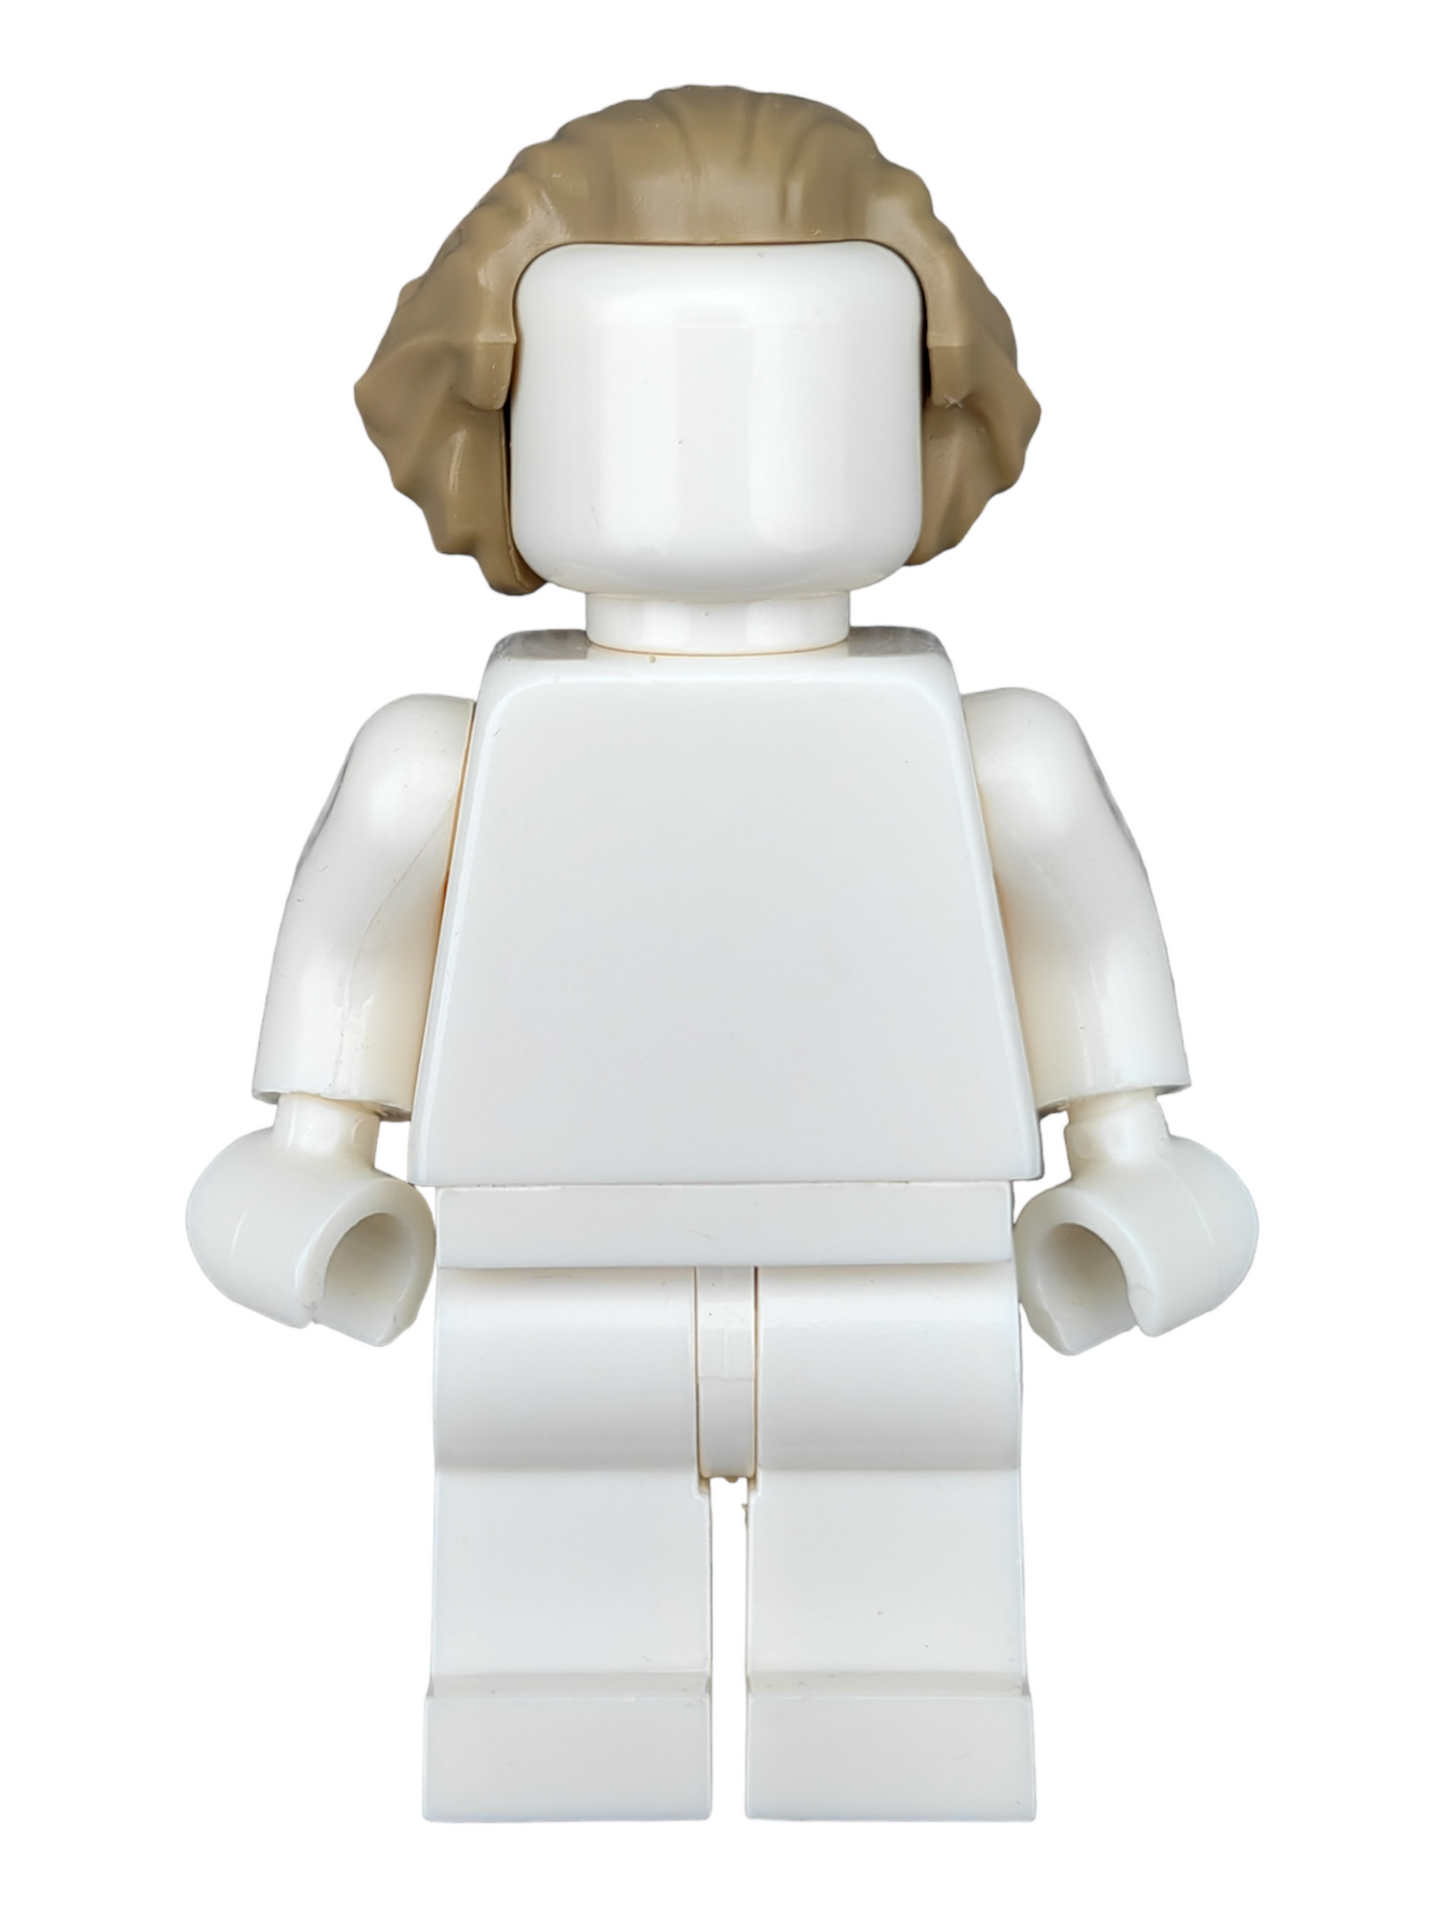 LEGO Wig, Light Brown Hair Swept Back with a Peak, and Bushy at the Back - UB1280